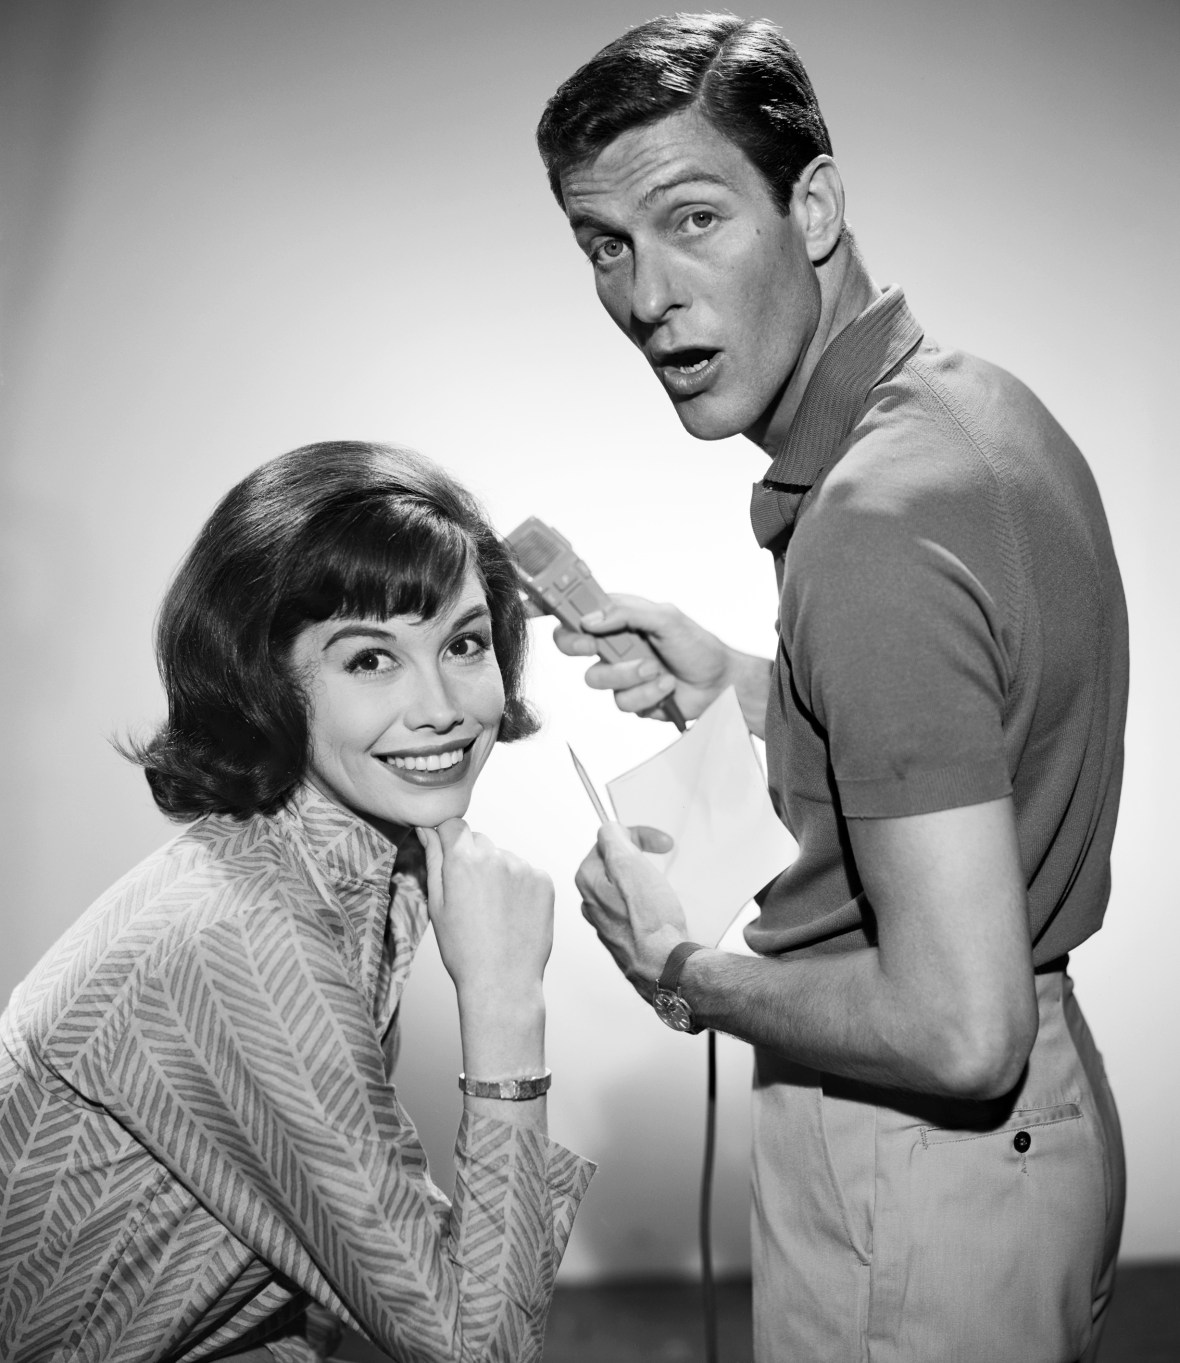 Dick Van Dyke On Late Co Star Mary Tyler Moore We Had A Crush On Each Other